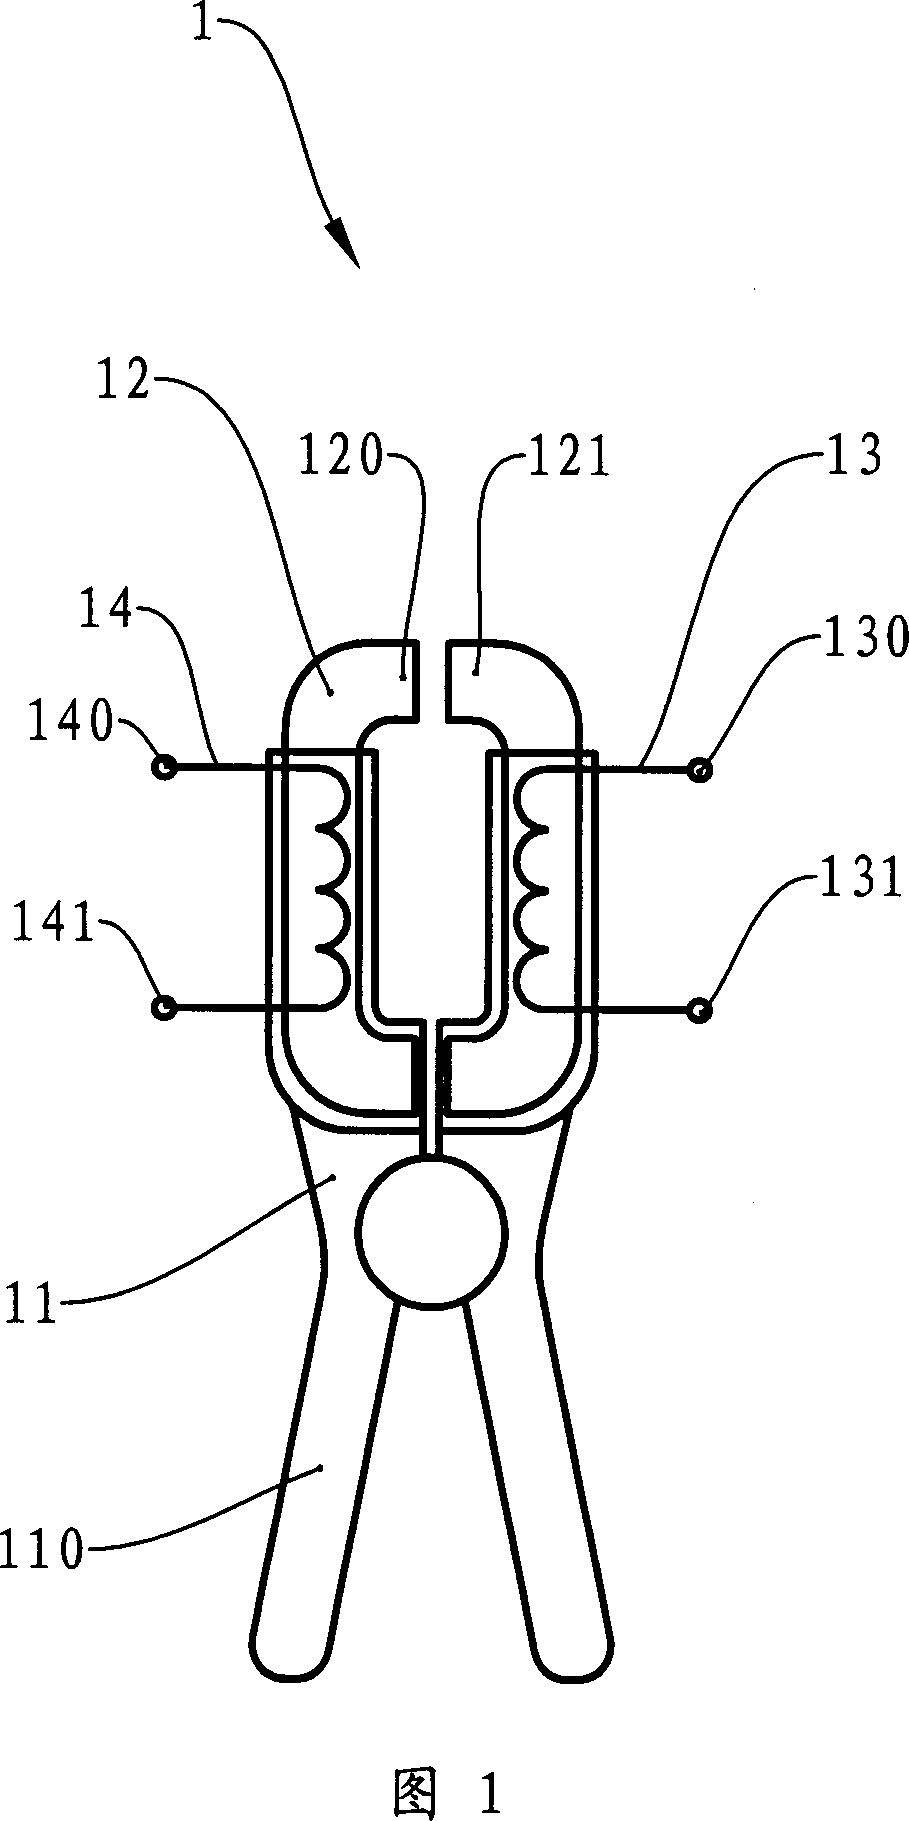 Forcipated mutual-inductor, forcipated ammeter and verification method of forcipated ammeter